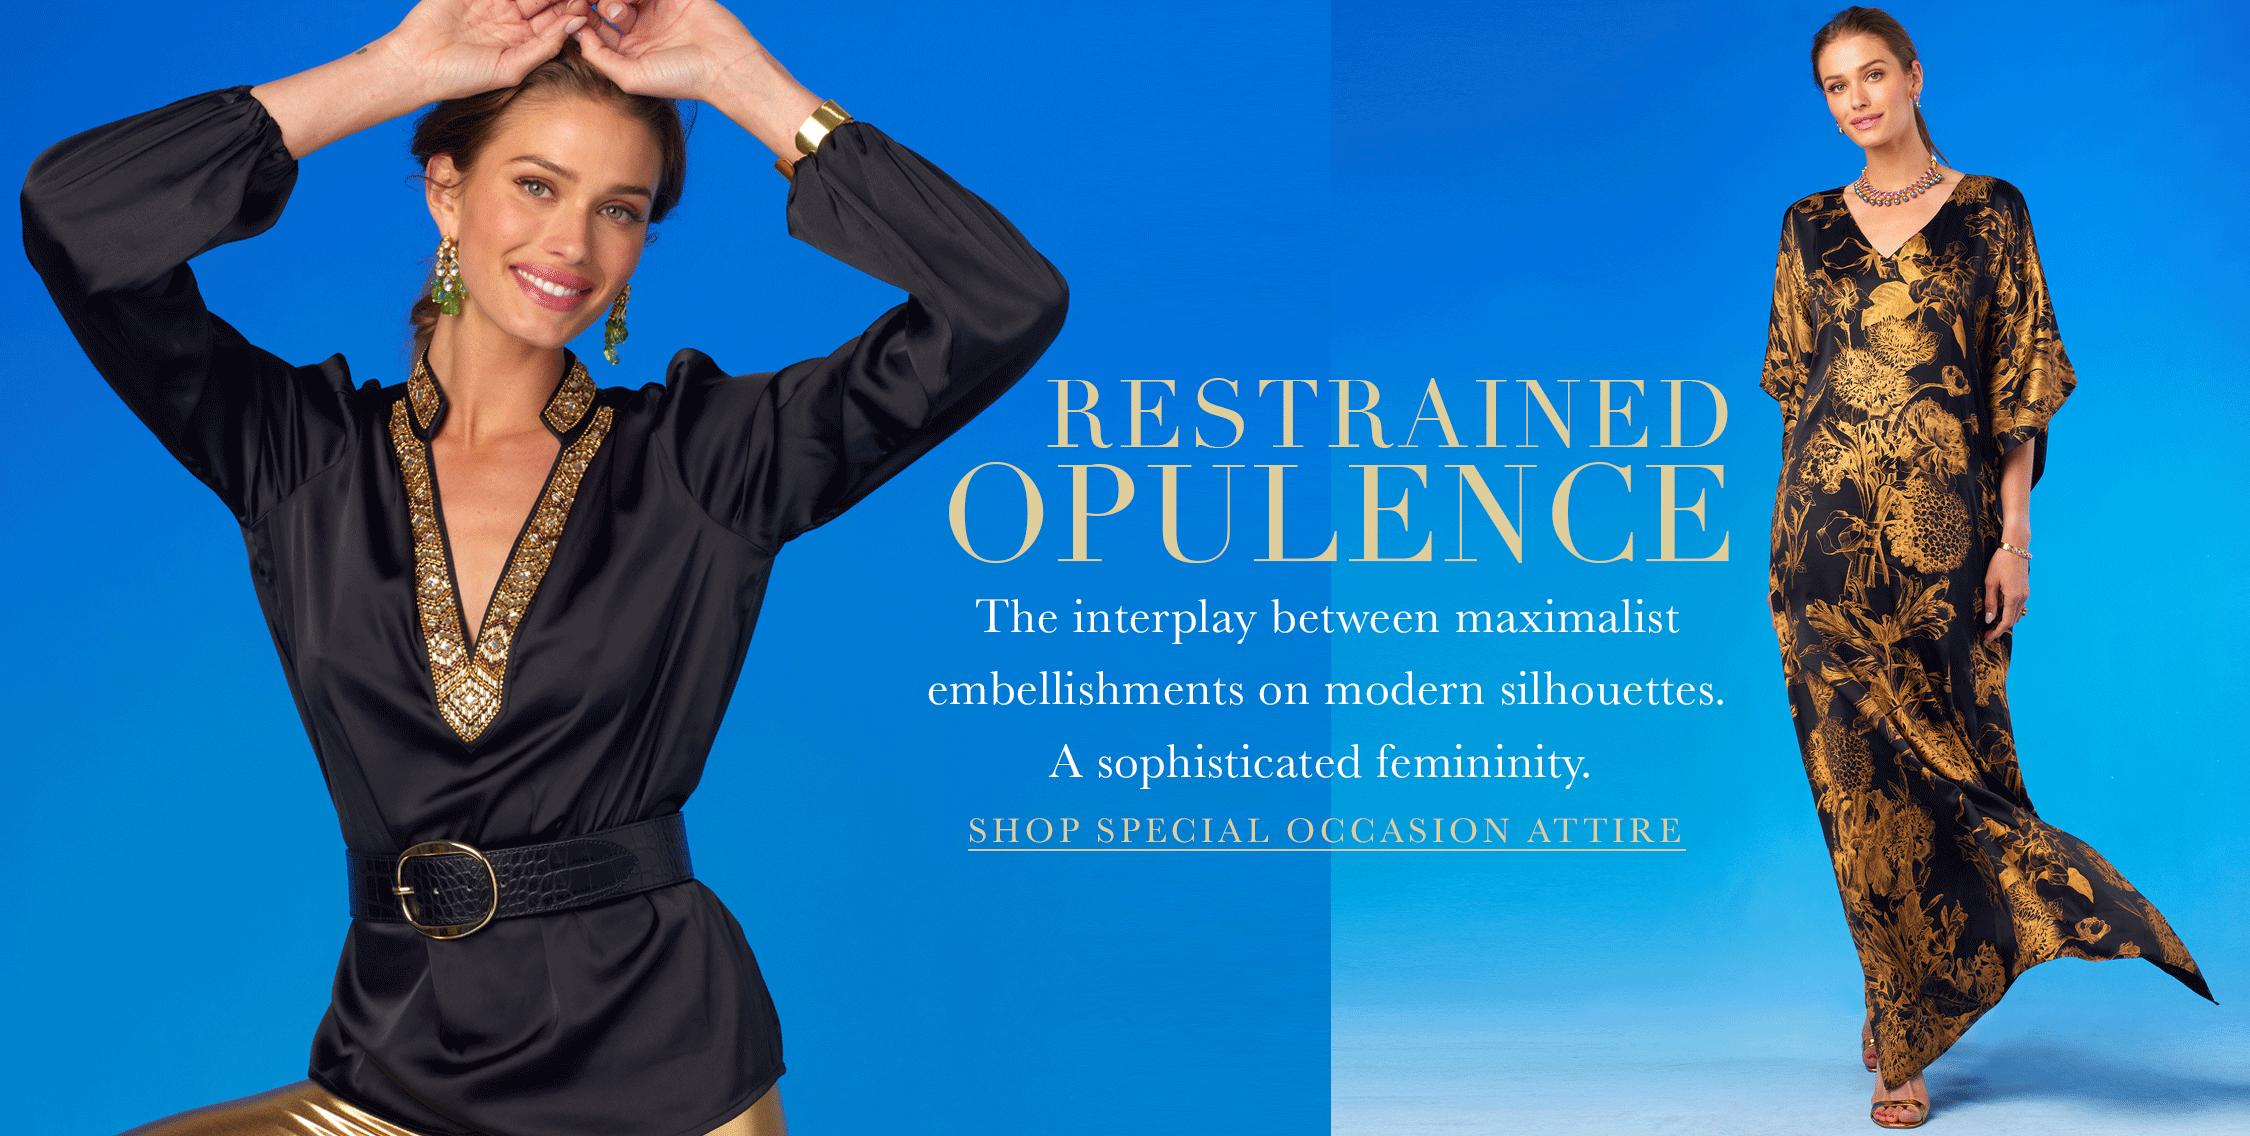 Restrained opulence, The interplay between maximalist embellishment and modern silhouettes A sophisticated femininity. Click to shop special occasion attire.